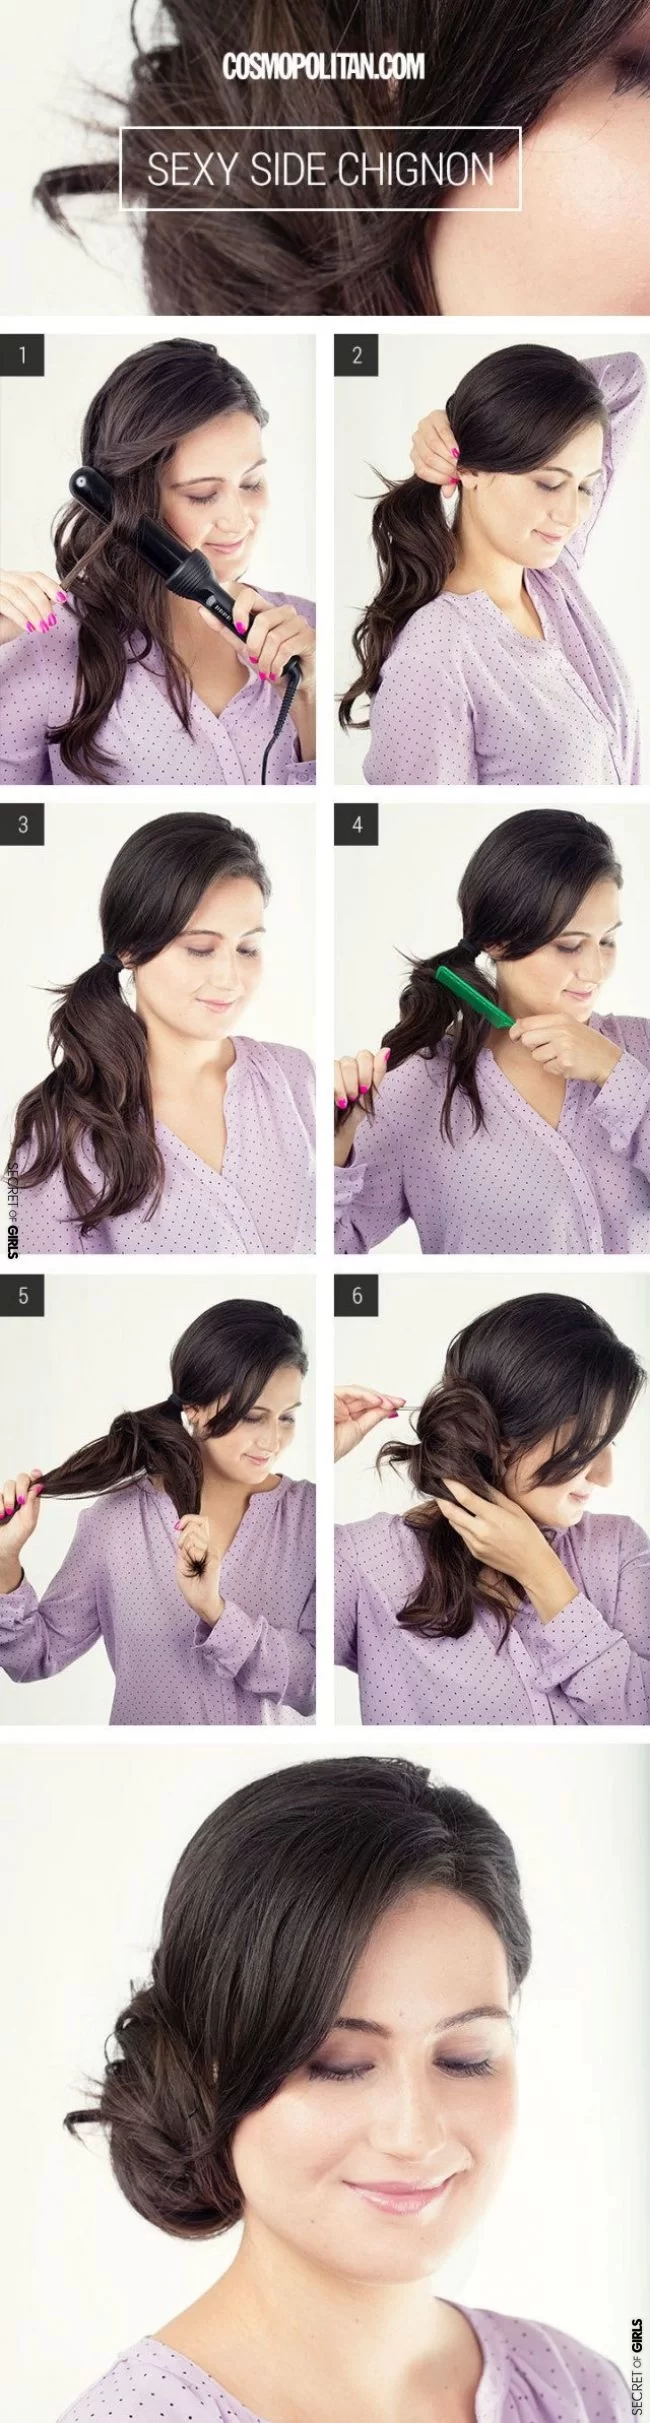 12 Super Easy Hair Looks Every Woman Can Do in 5 Minutes